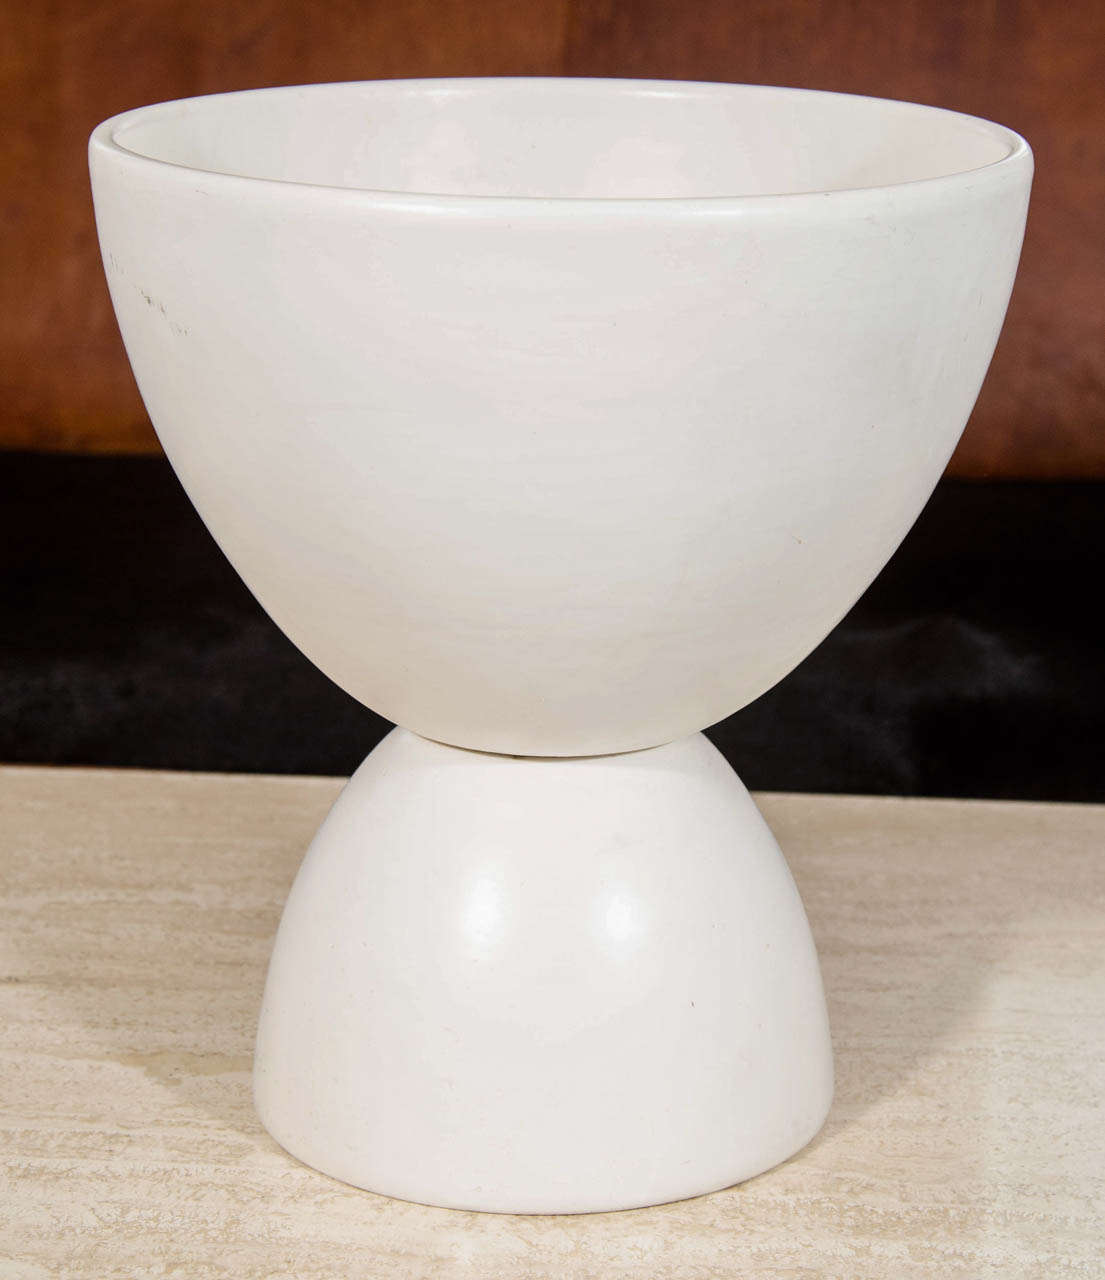 Modern double bowl ceramic compote with white glaze